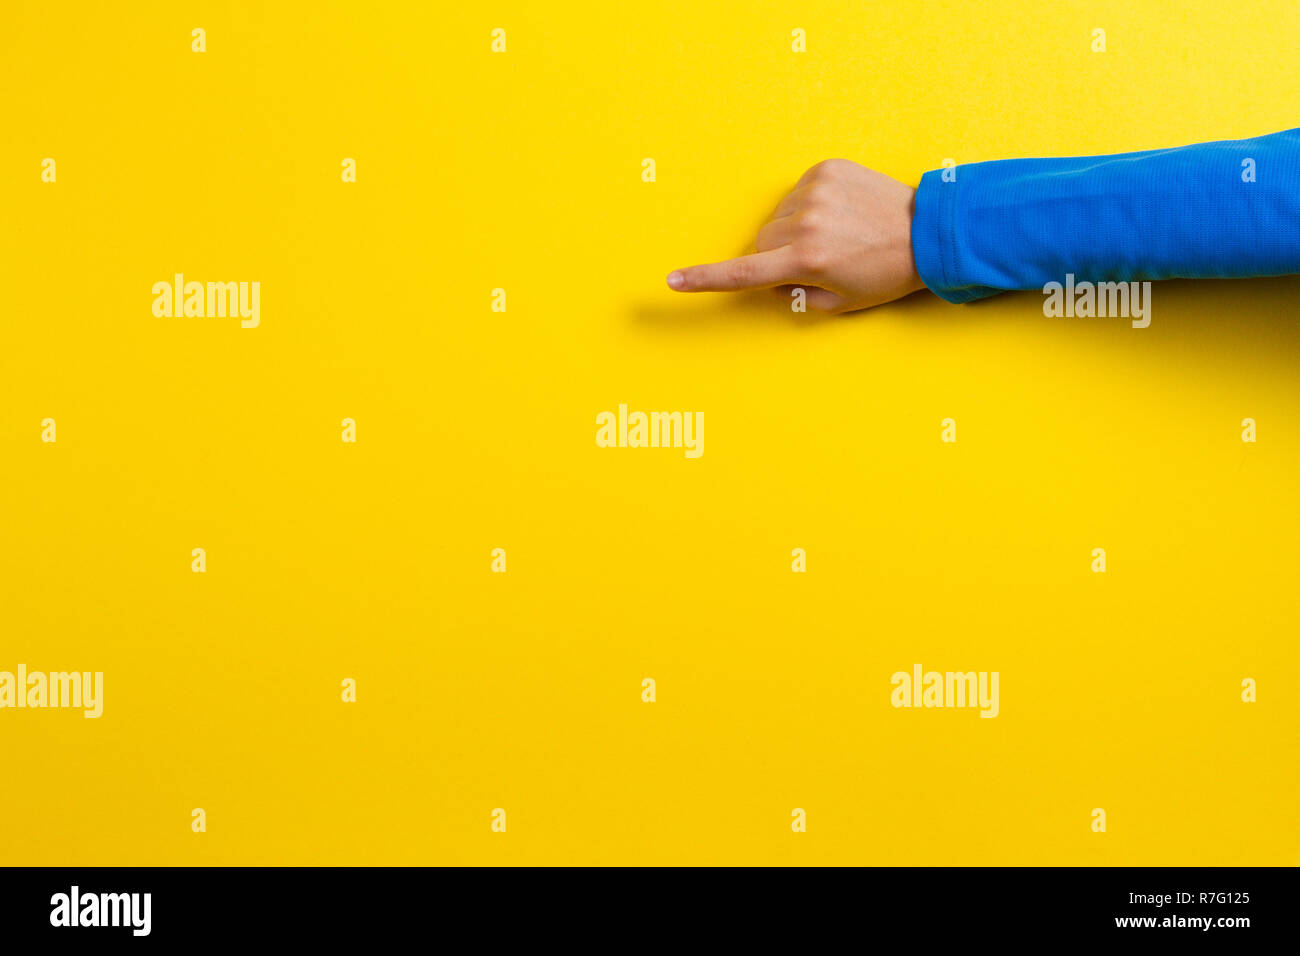 Kid hand pointing or touching something on yellow background Stock Photo